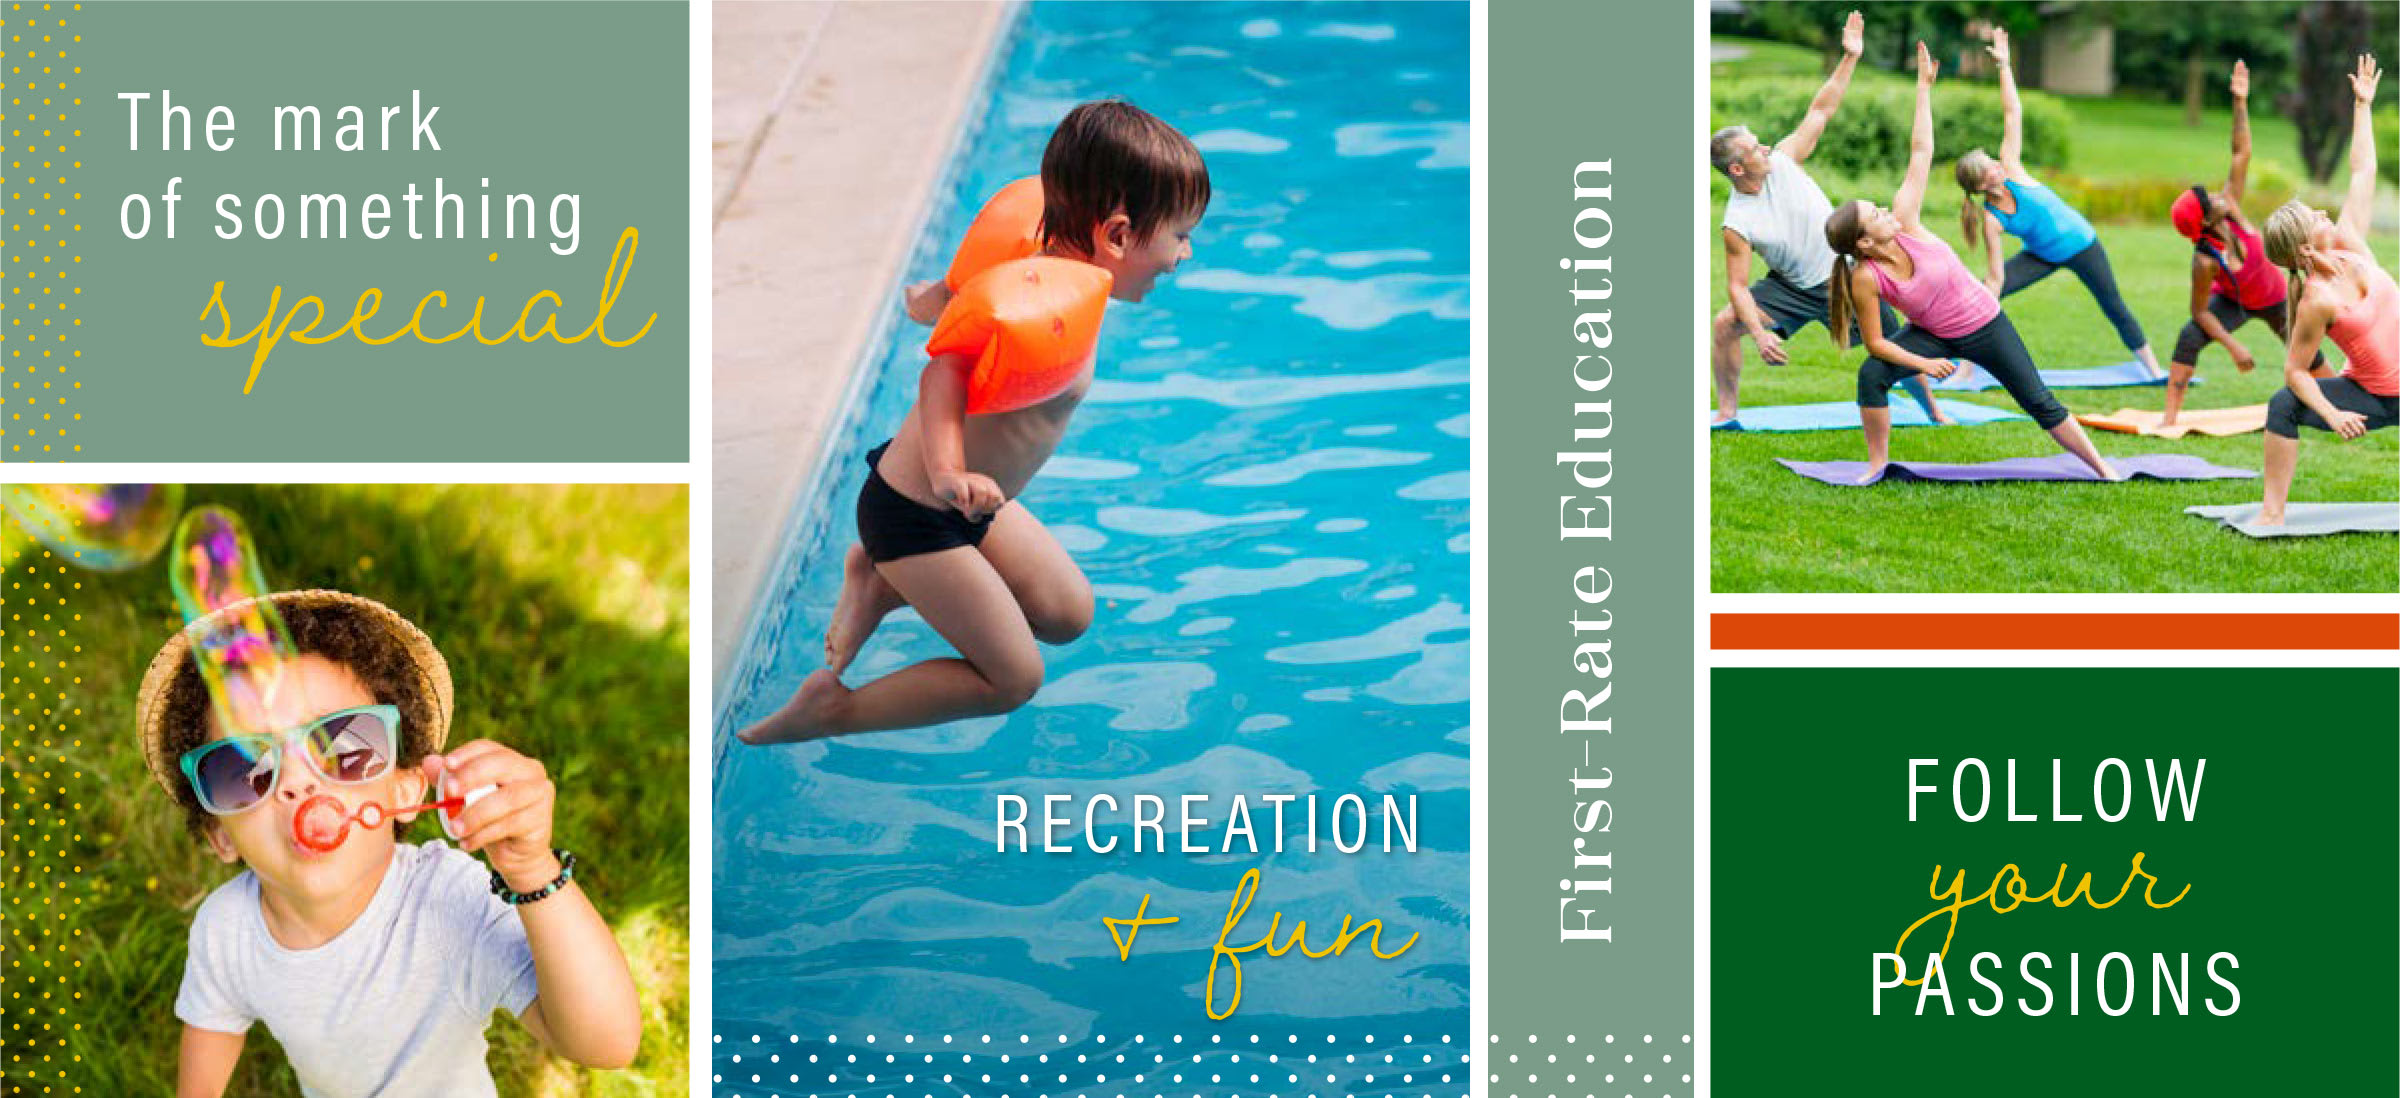 greenpointe at eastmark: the mark of something special, recreation + fun, first rate education, follow your passions